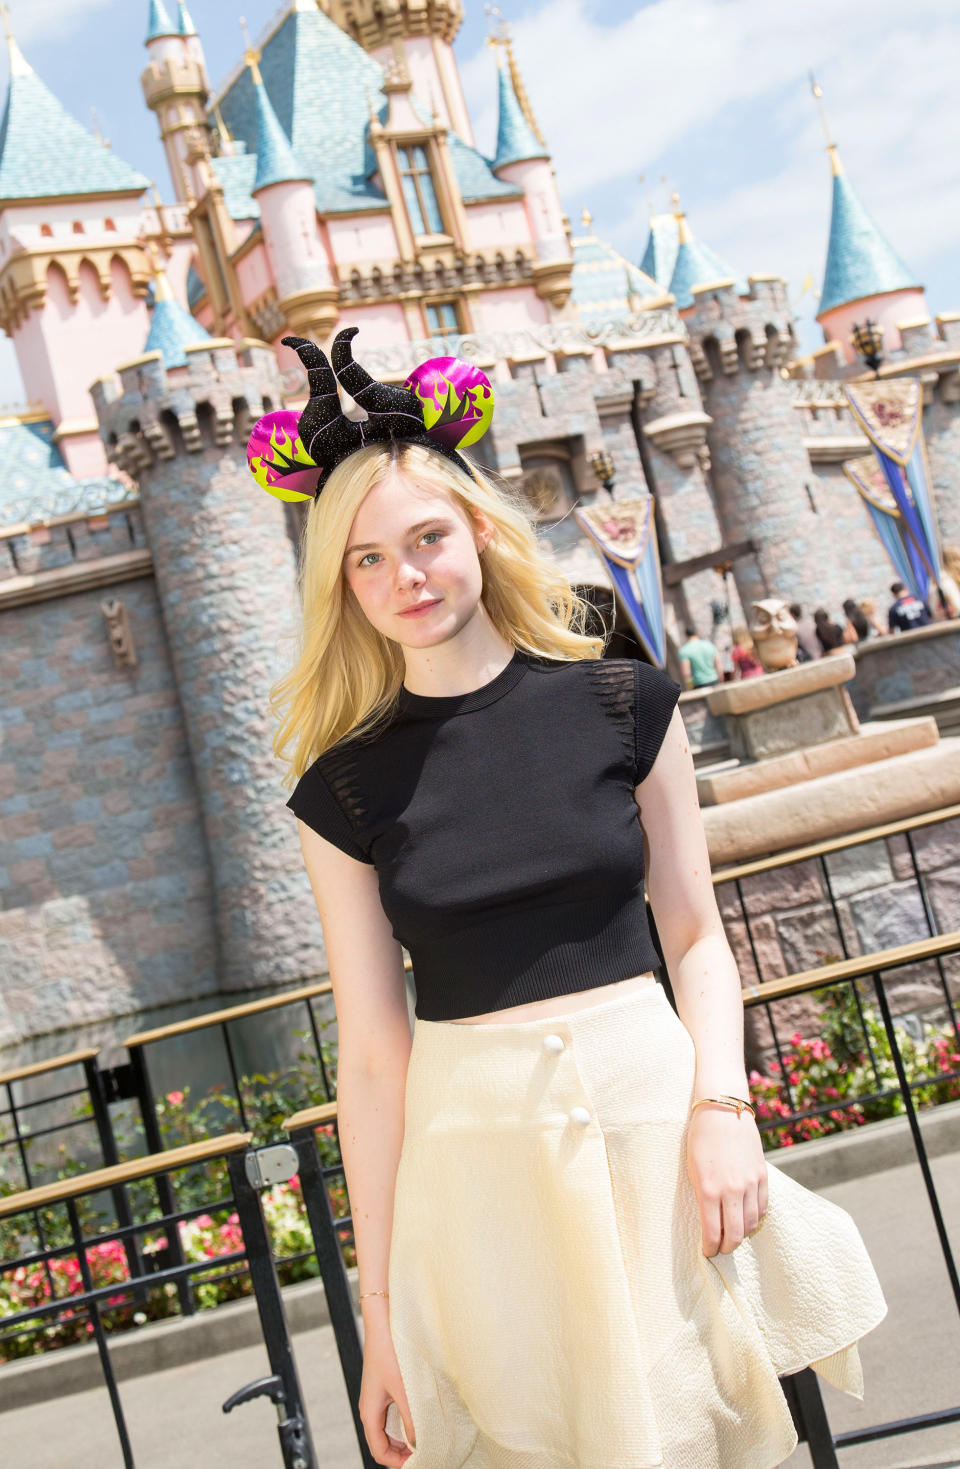 ANAHEIM, CA - APRIL 12:  Actress Elle Fanning visits Disneyland on April 12, 2014 in Anaheim, California.  (Photo by Paul Hiffmeyer/Disney Parks via Getty Images)